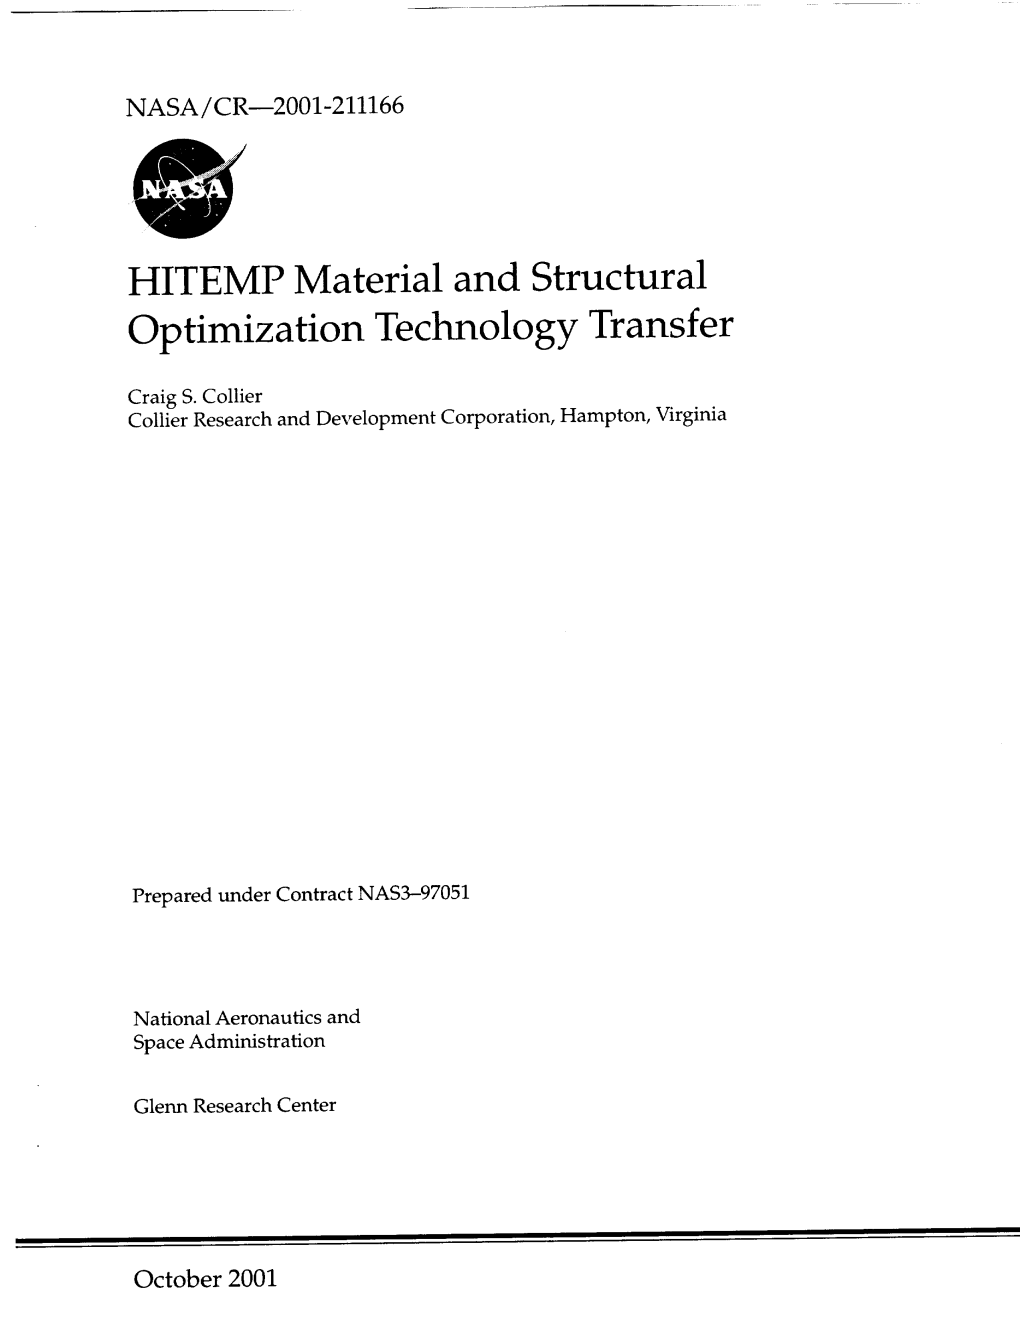 HITEMP Material and Structural Optimization Technology Transfer